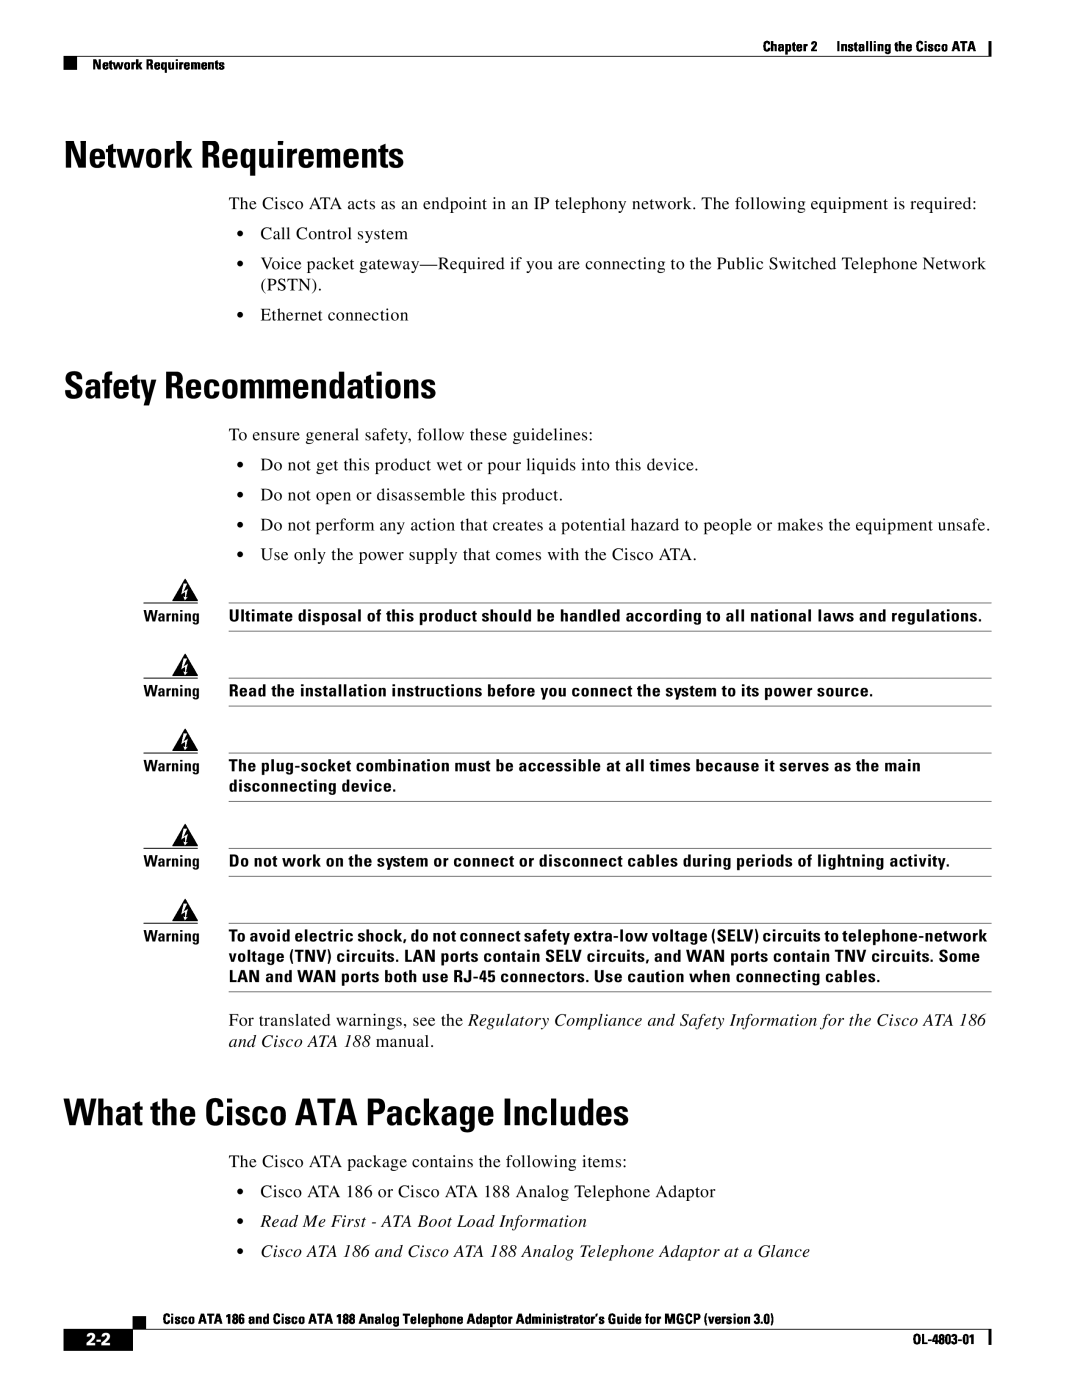 Cisco Systems ATA 186 manual Network Requirements, Safety Recommendations, What the Cisco ATA Package Includes 